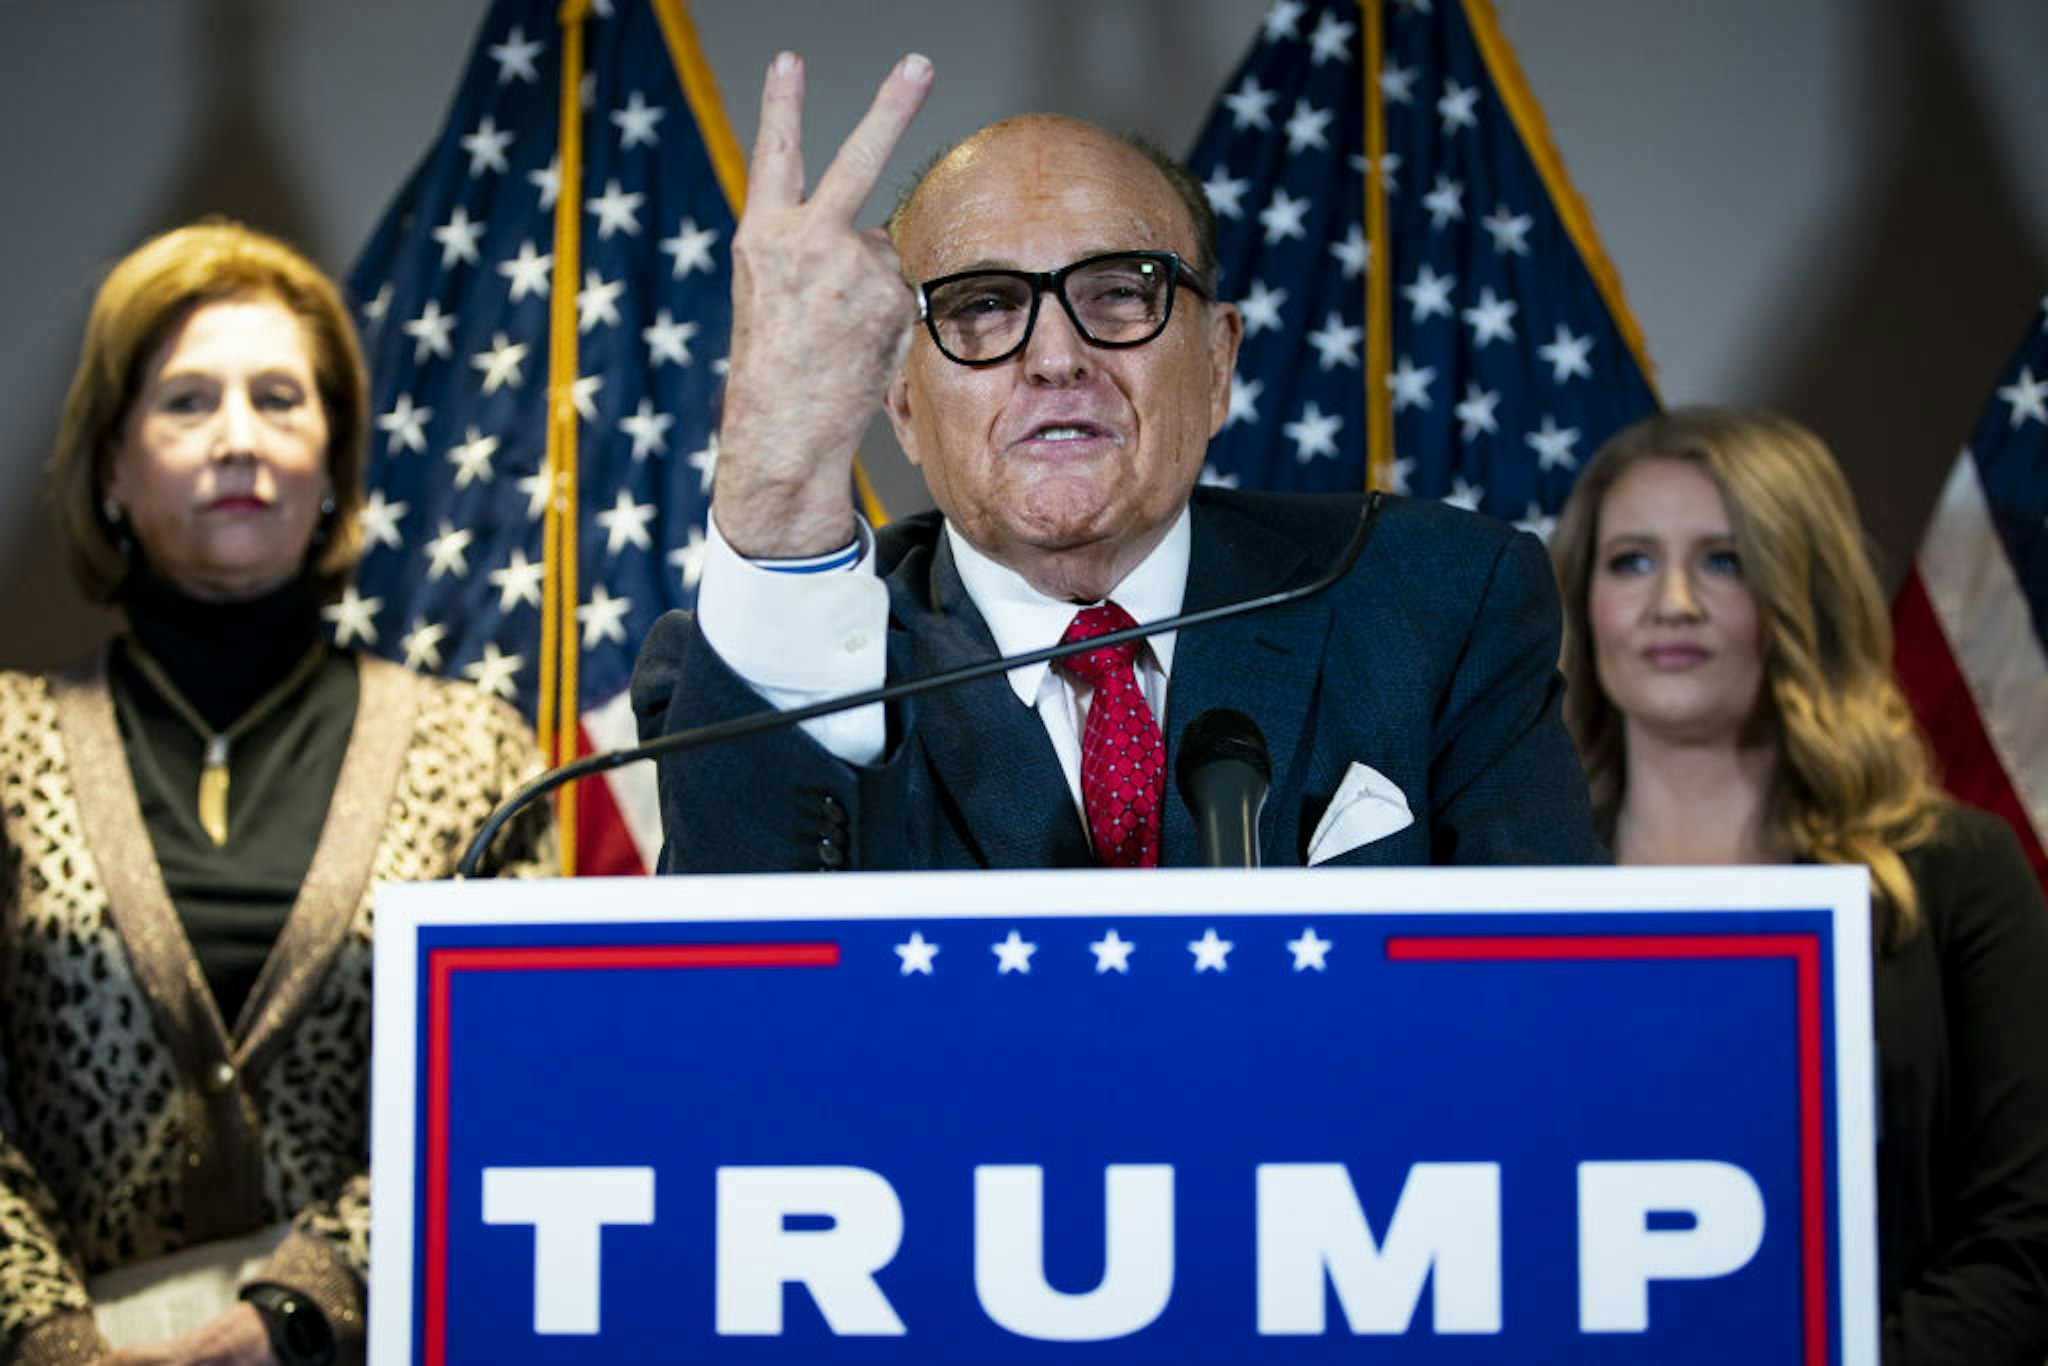 Rudy Giuliani, personal lawyer to U.S. President Donald Trump, speaks during a news conference at the Republican National Committee headquarters in Washington, D.C., U.S., on Thursday, Nov. 19, 2020.